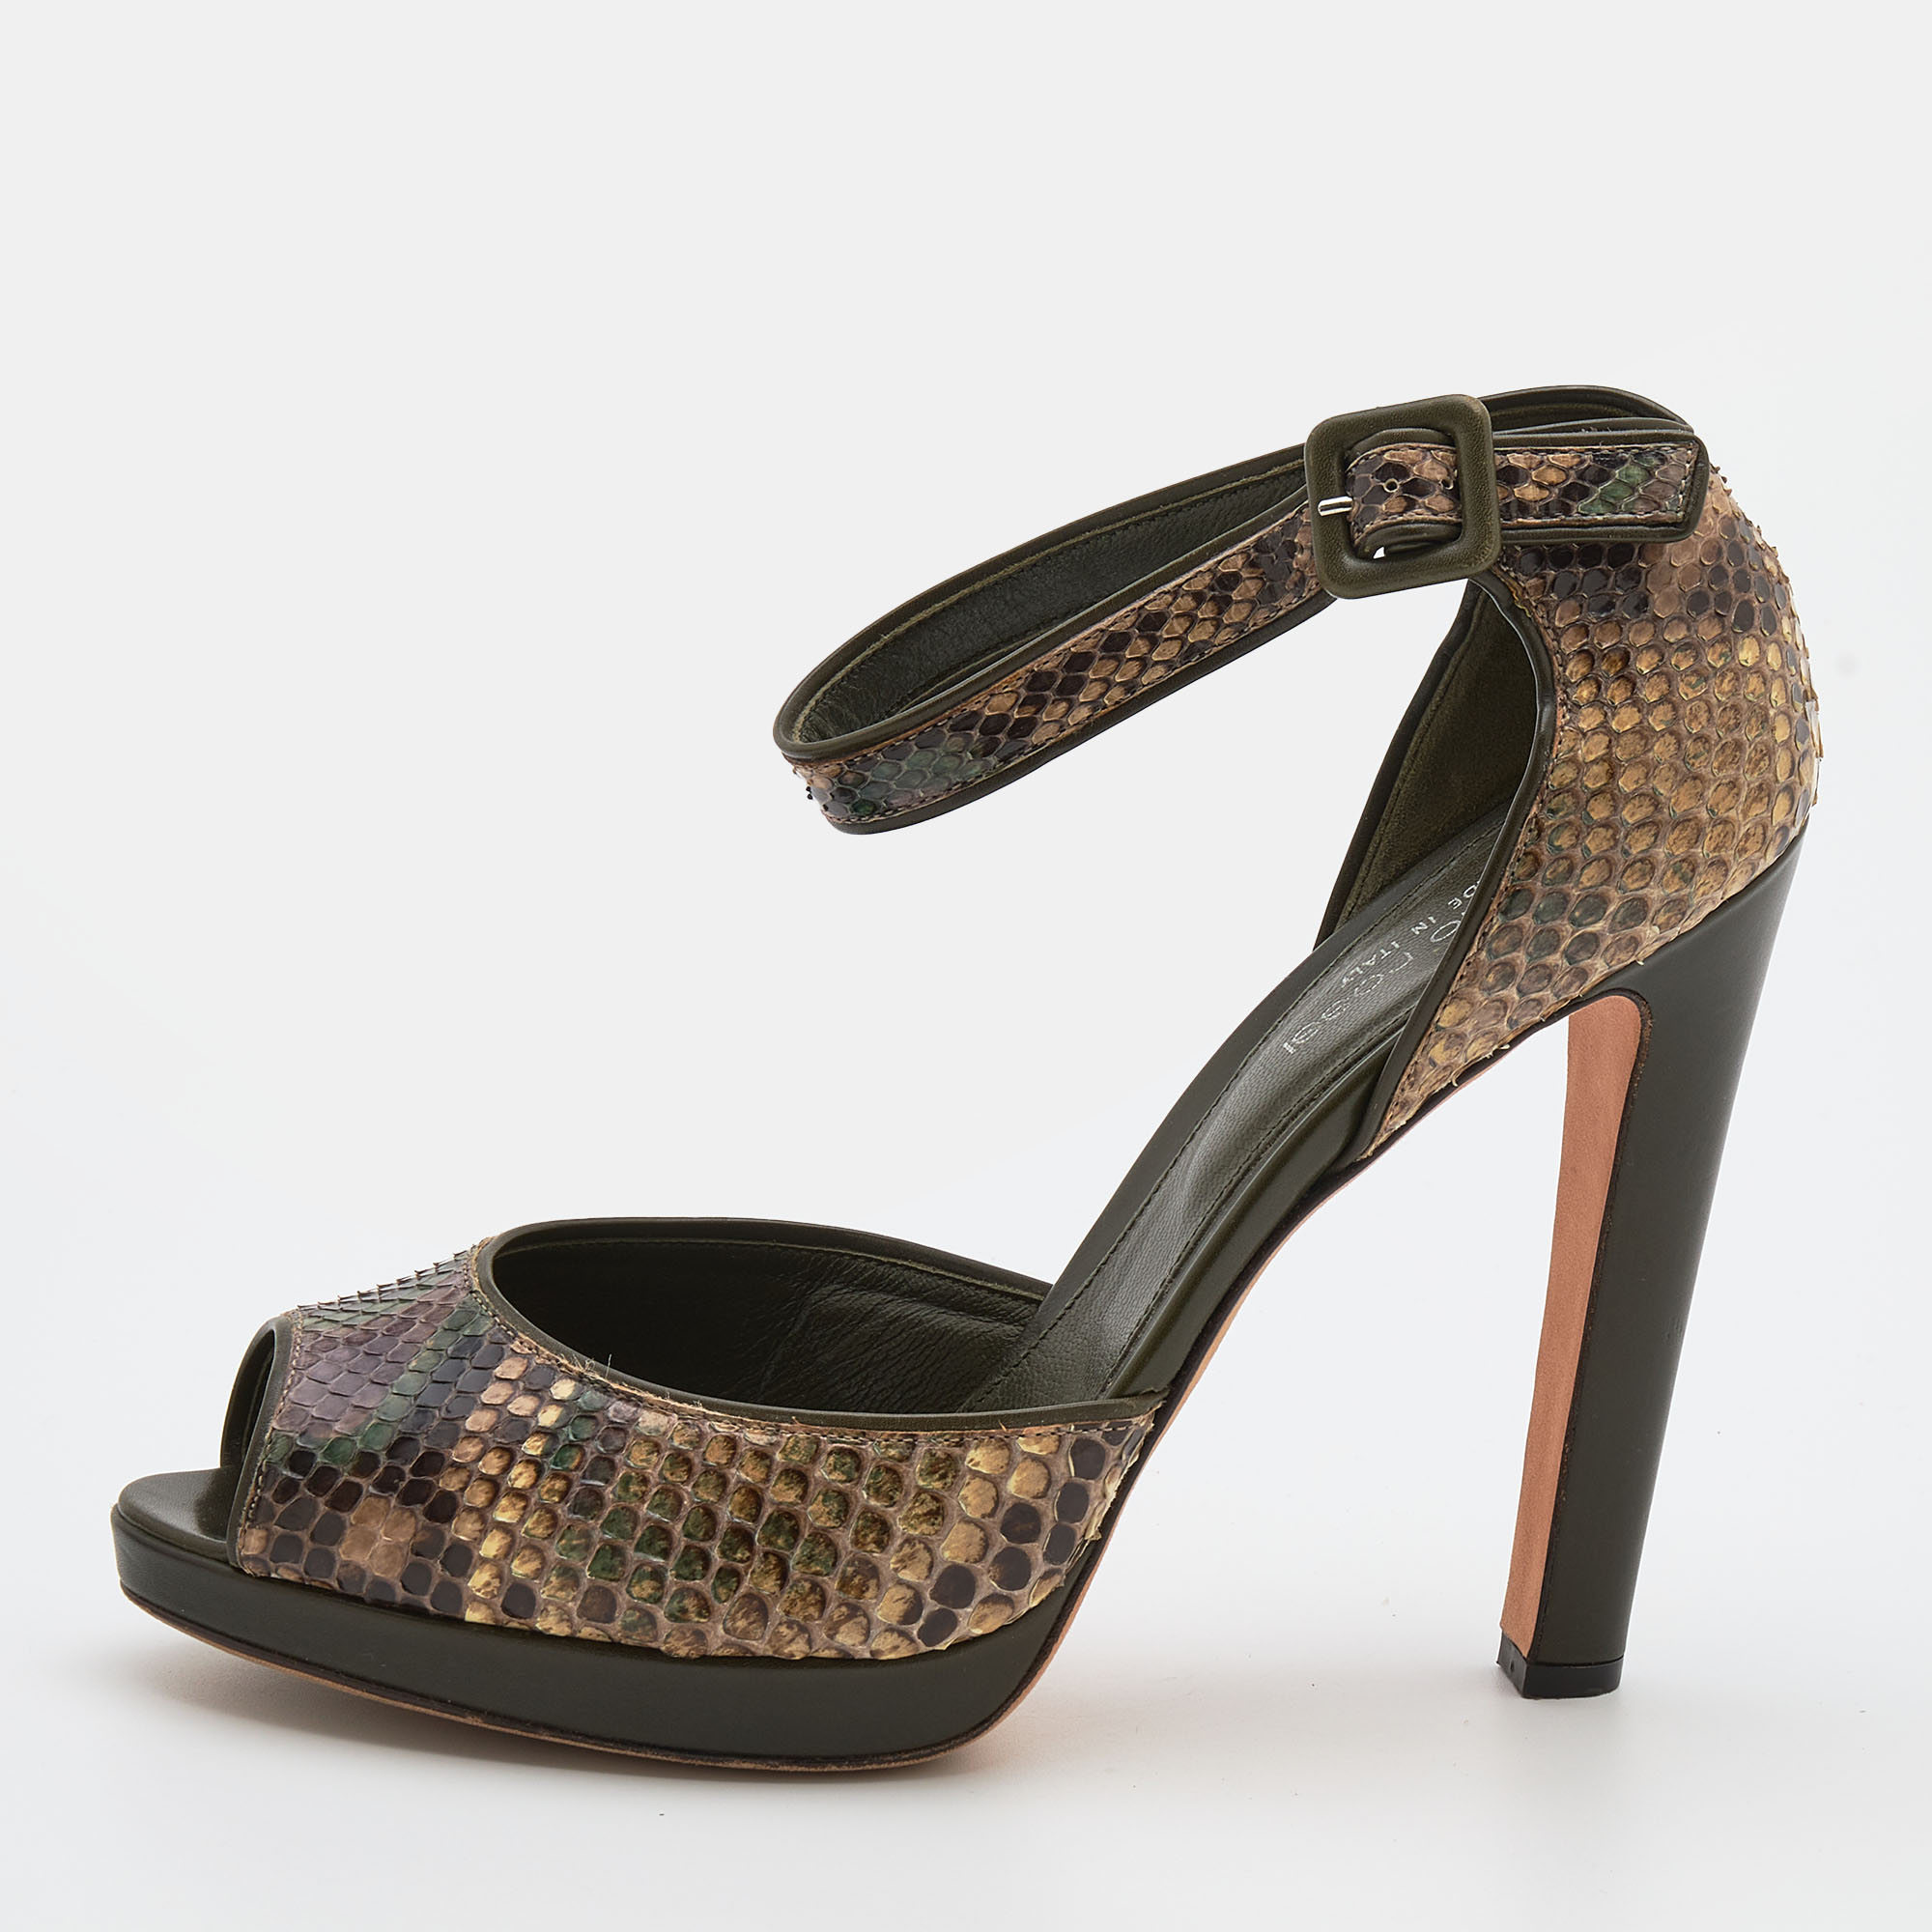 Sergio Rossi Multicolor Python And Leather Trim Ankle Strap Sandals Size 39